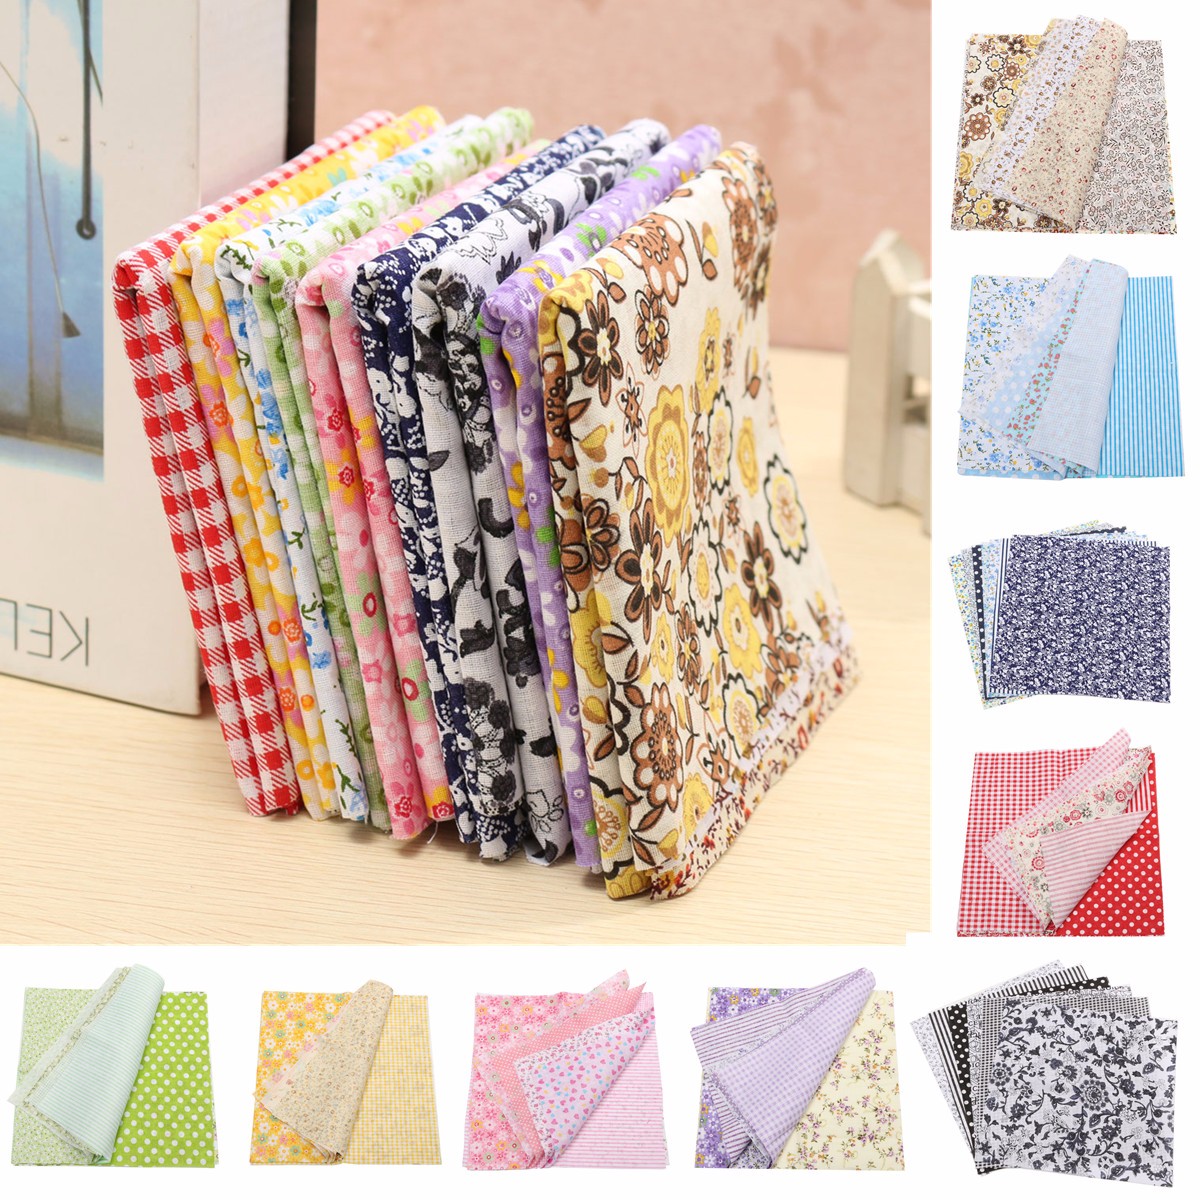 Find 10 x 10 Bundle Lot of 7 Fat Quarters No Duplicates 100 Cotton Quilting Fabric for Sale on Gipsybee.com with cryptocurrencies